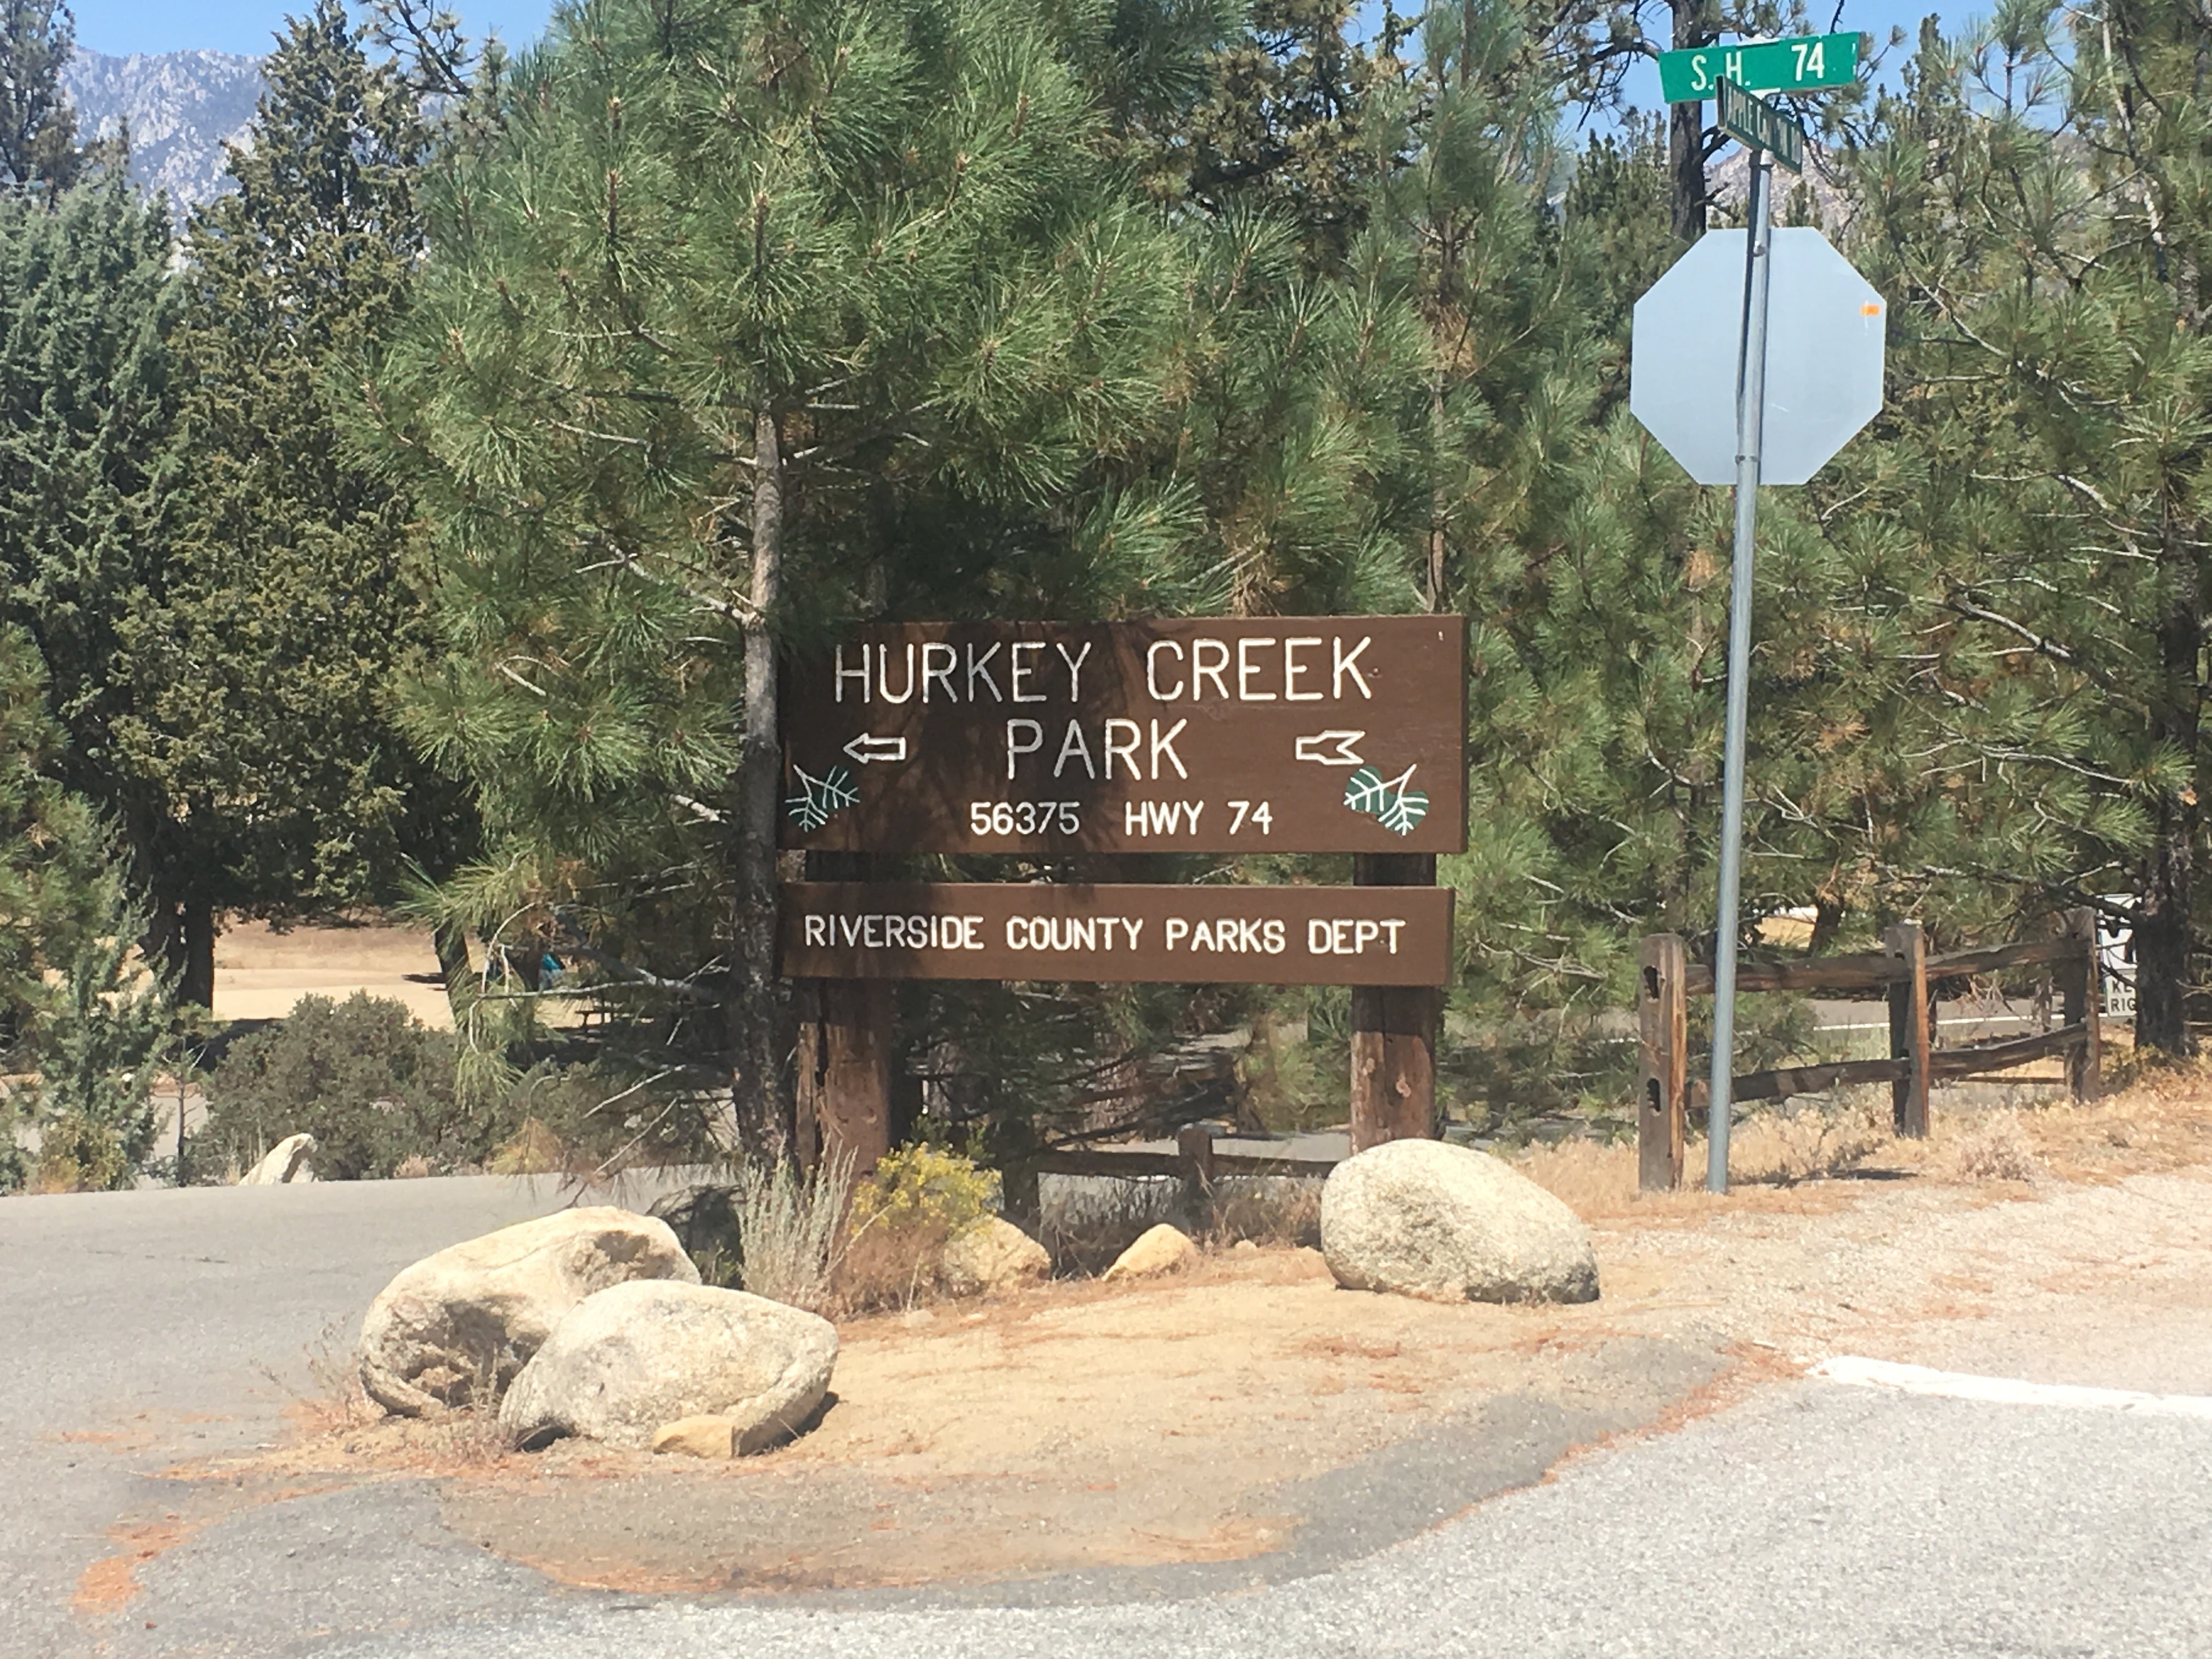 Camper submitted image from Hurkey Creek Park - 2